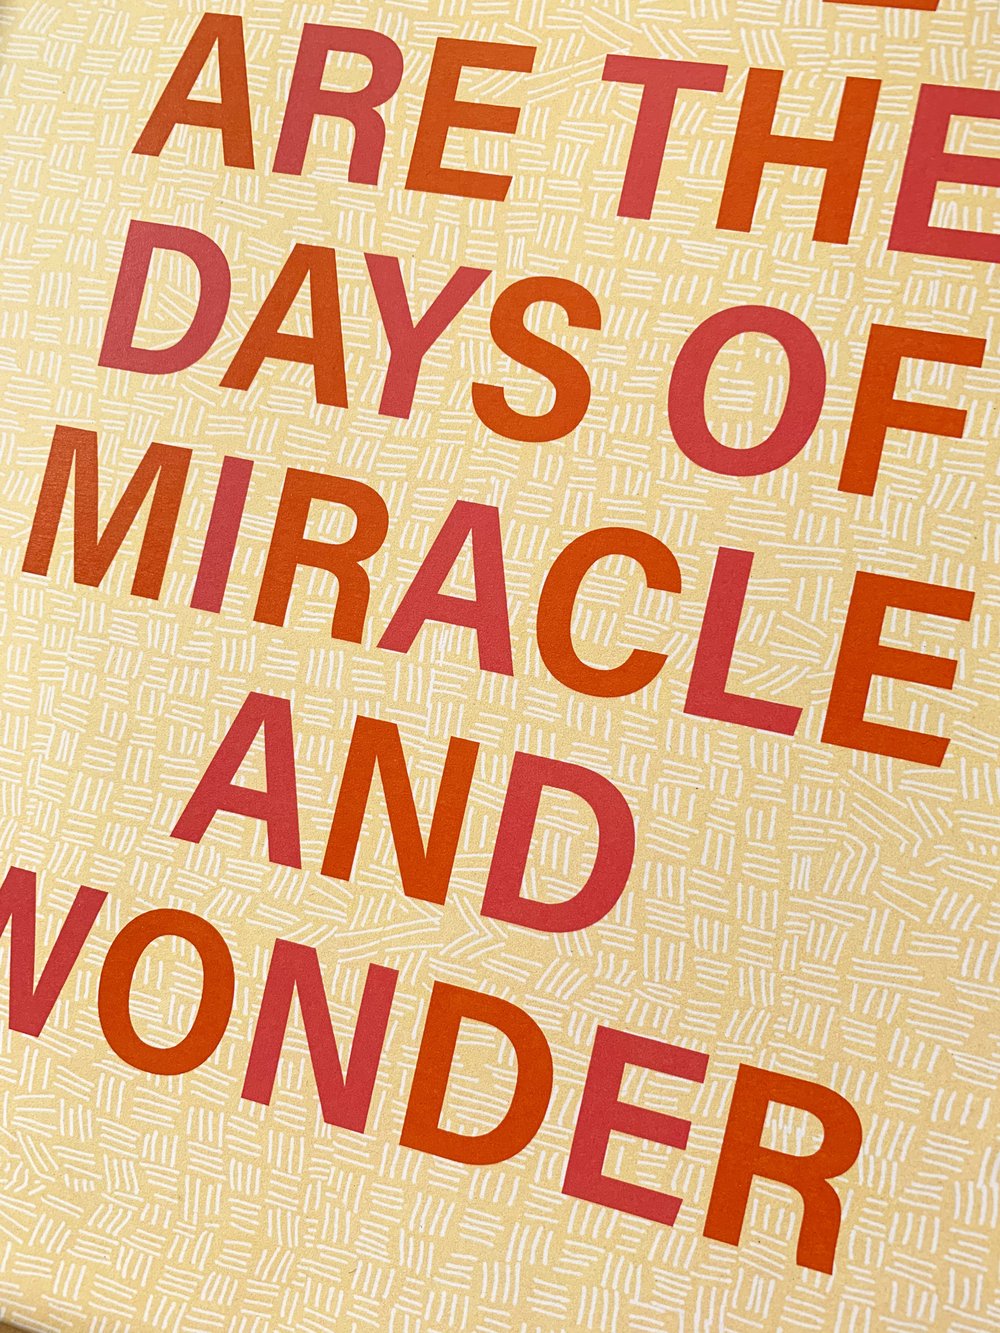 these are the days of miracle and wonder-11 x 14 print